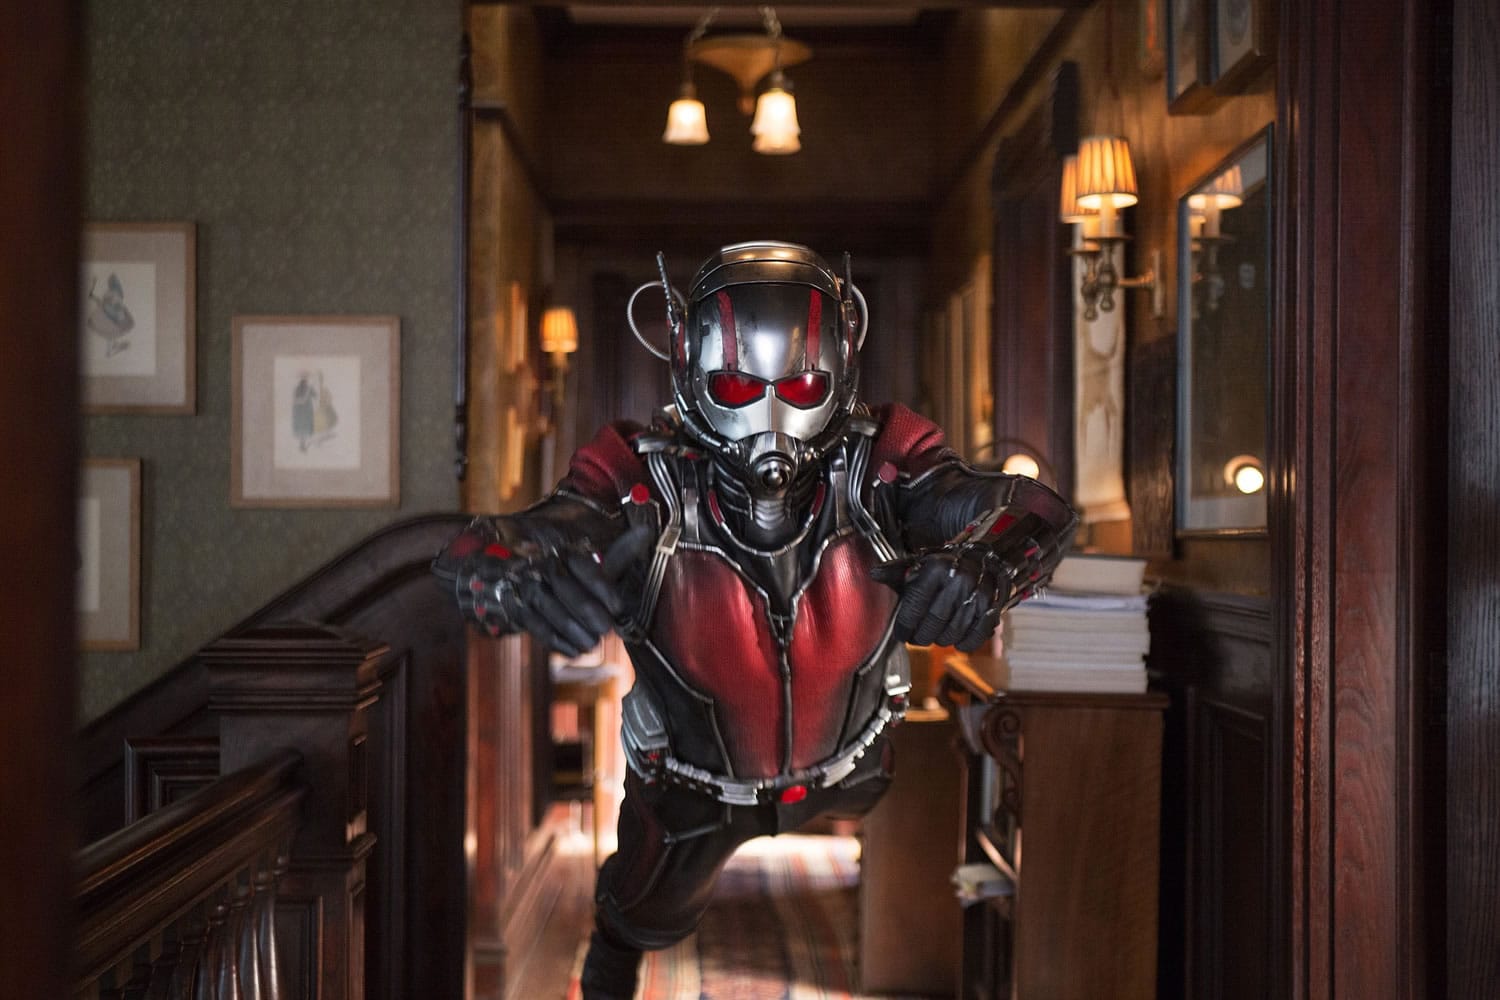 Paul Rudd stars as Scott Lang, and his alter-ego, Ant-Man, in Marvel's &quot;Ant-Man.&quot;